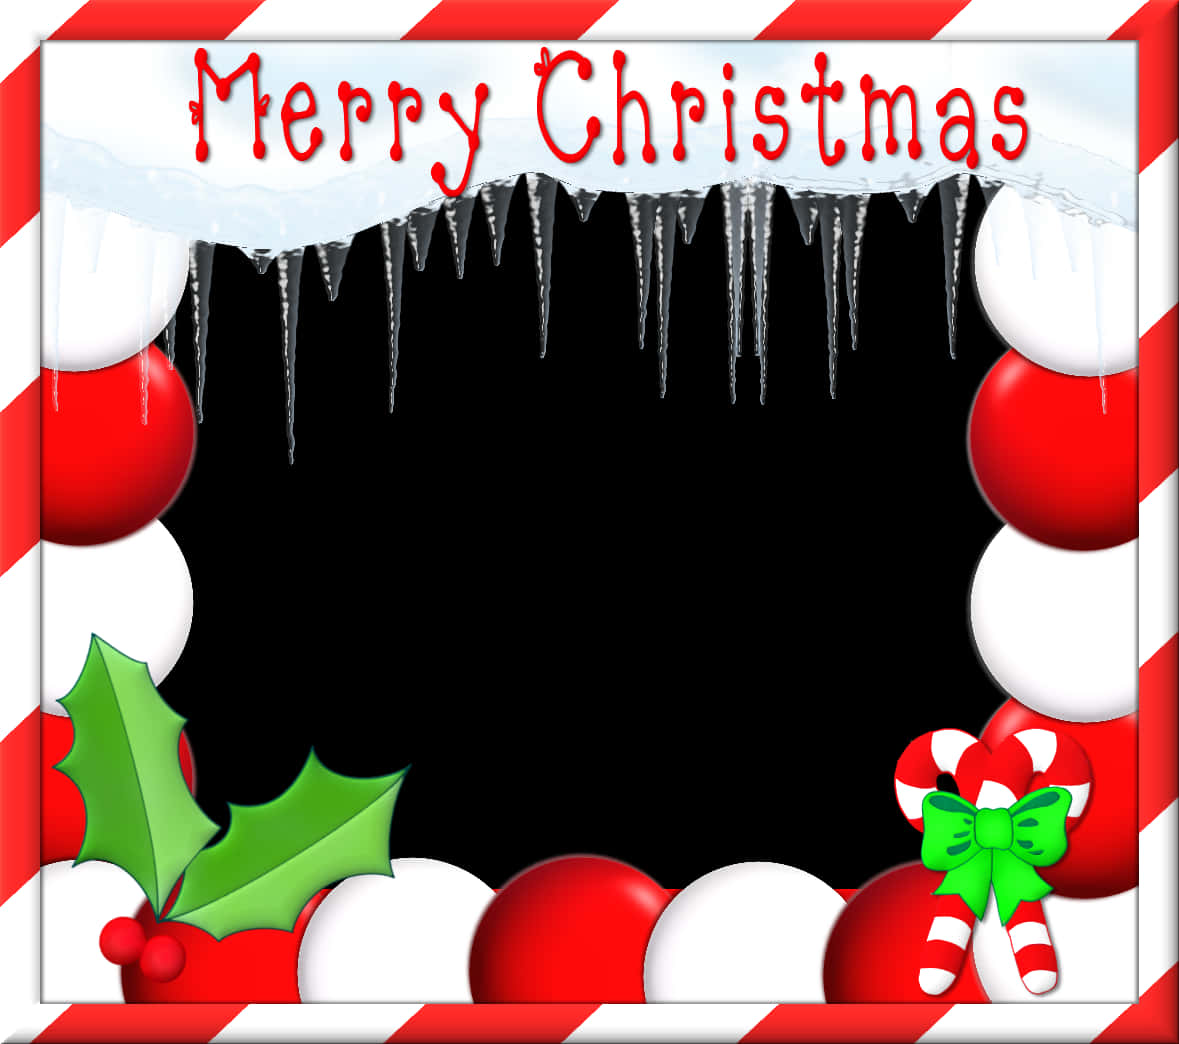 Download christmas frame with candy canes and candy canes | Wallpapers.com